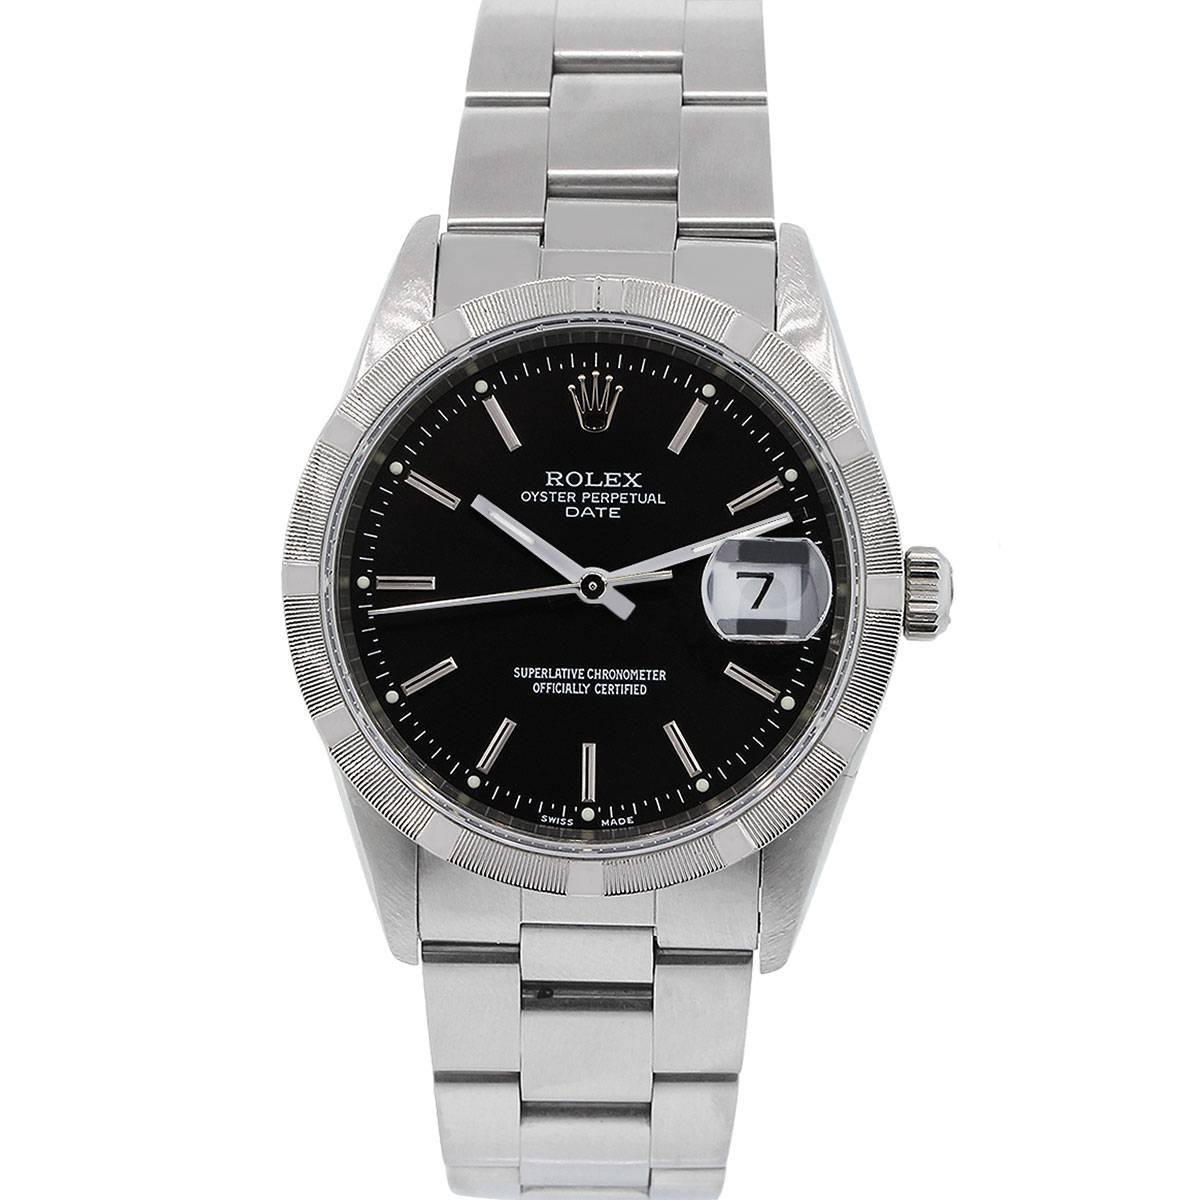 Brand: Rolex
MPN: 15210
Model: Date Oyster Perpetual
Case Material: Stainless Steel
Case Diameter: 33mm
Crystal: Scratch resistant sapphire crystal
Bezel: Stainless Steel Engine Turned Bezel.
Dial: Black Dial with raised index hour markers.